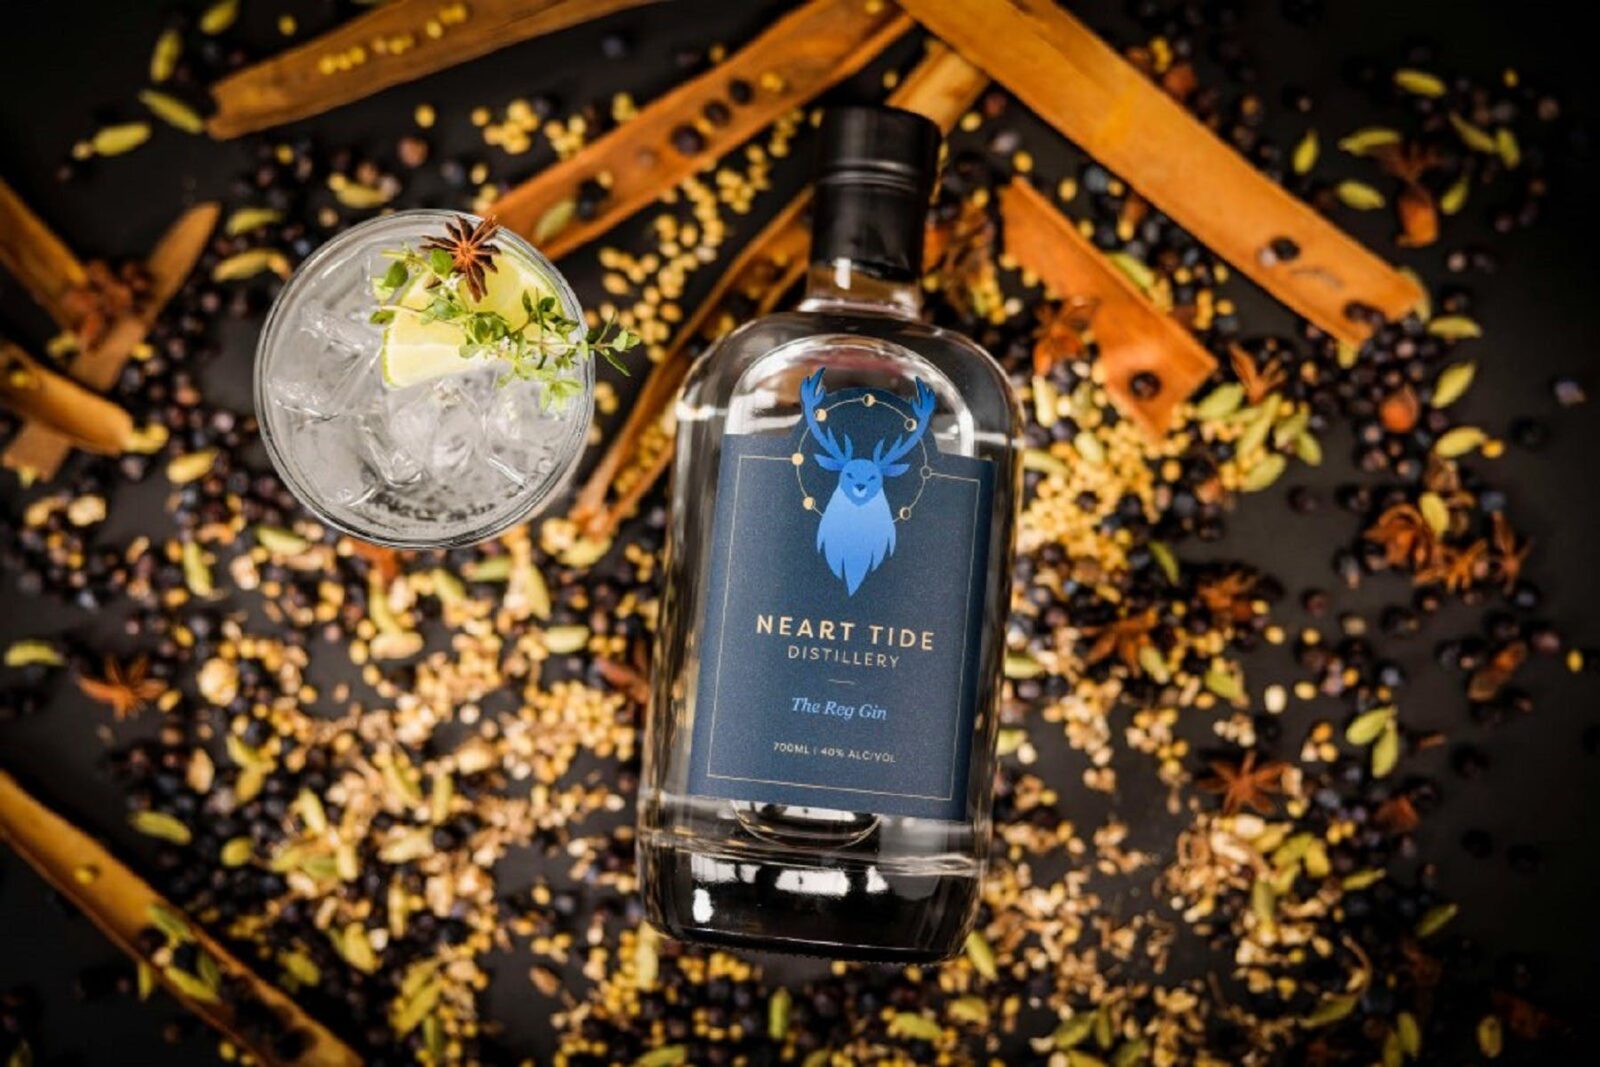 The Reg Gin - warming spices such as Cassia and Star Anise give this gin a lovely warmth and depth